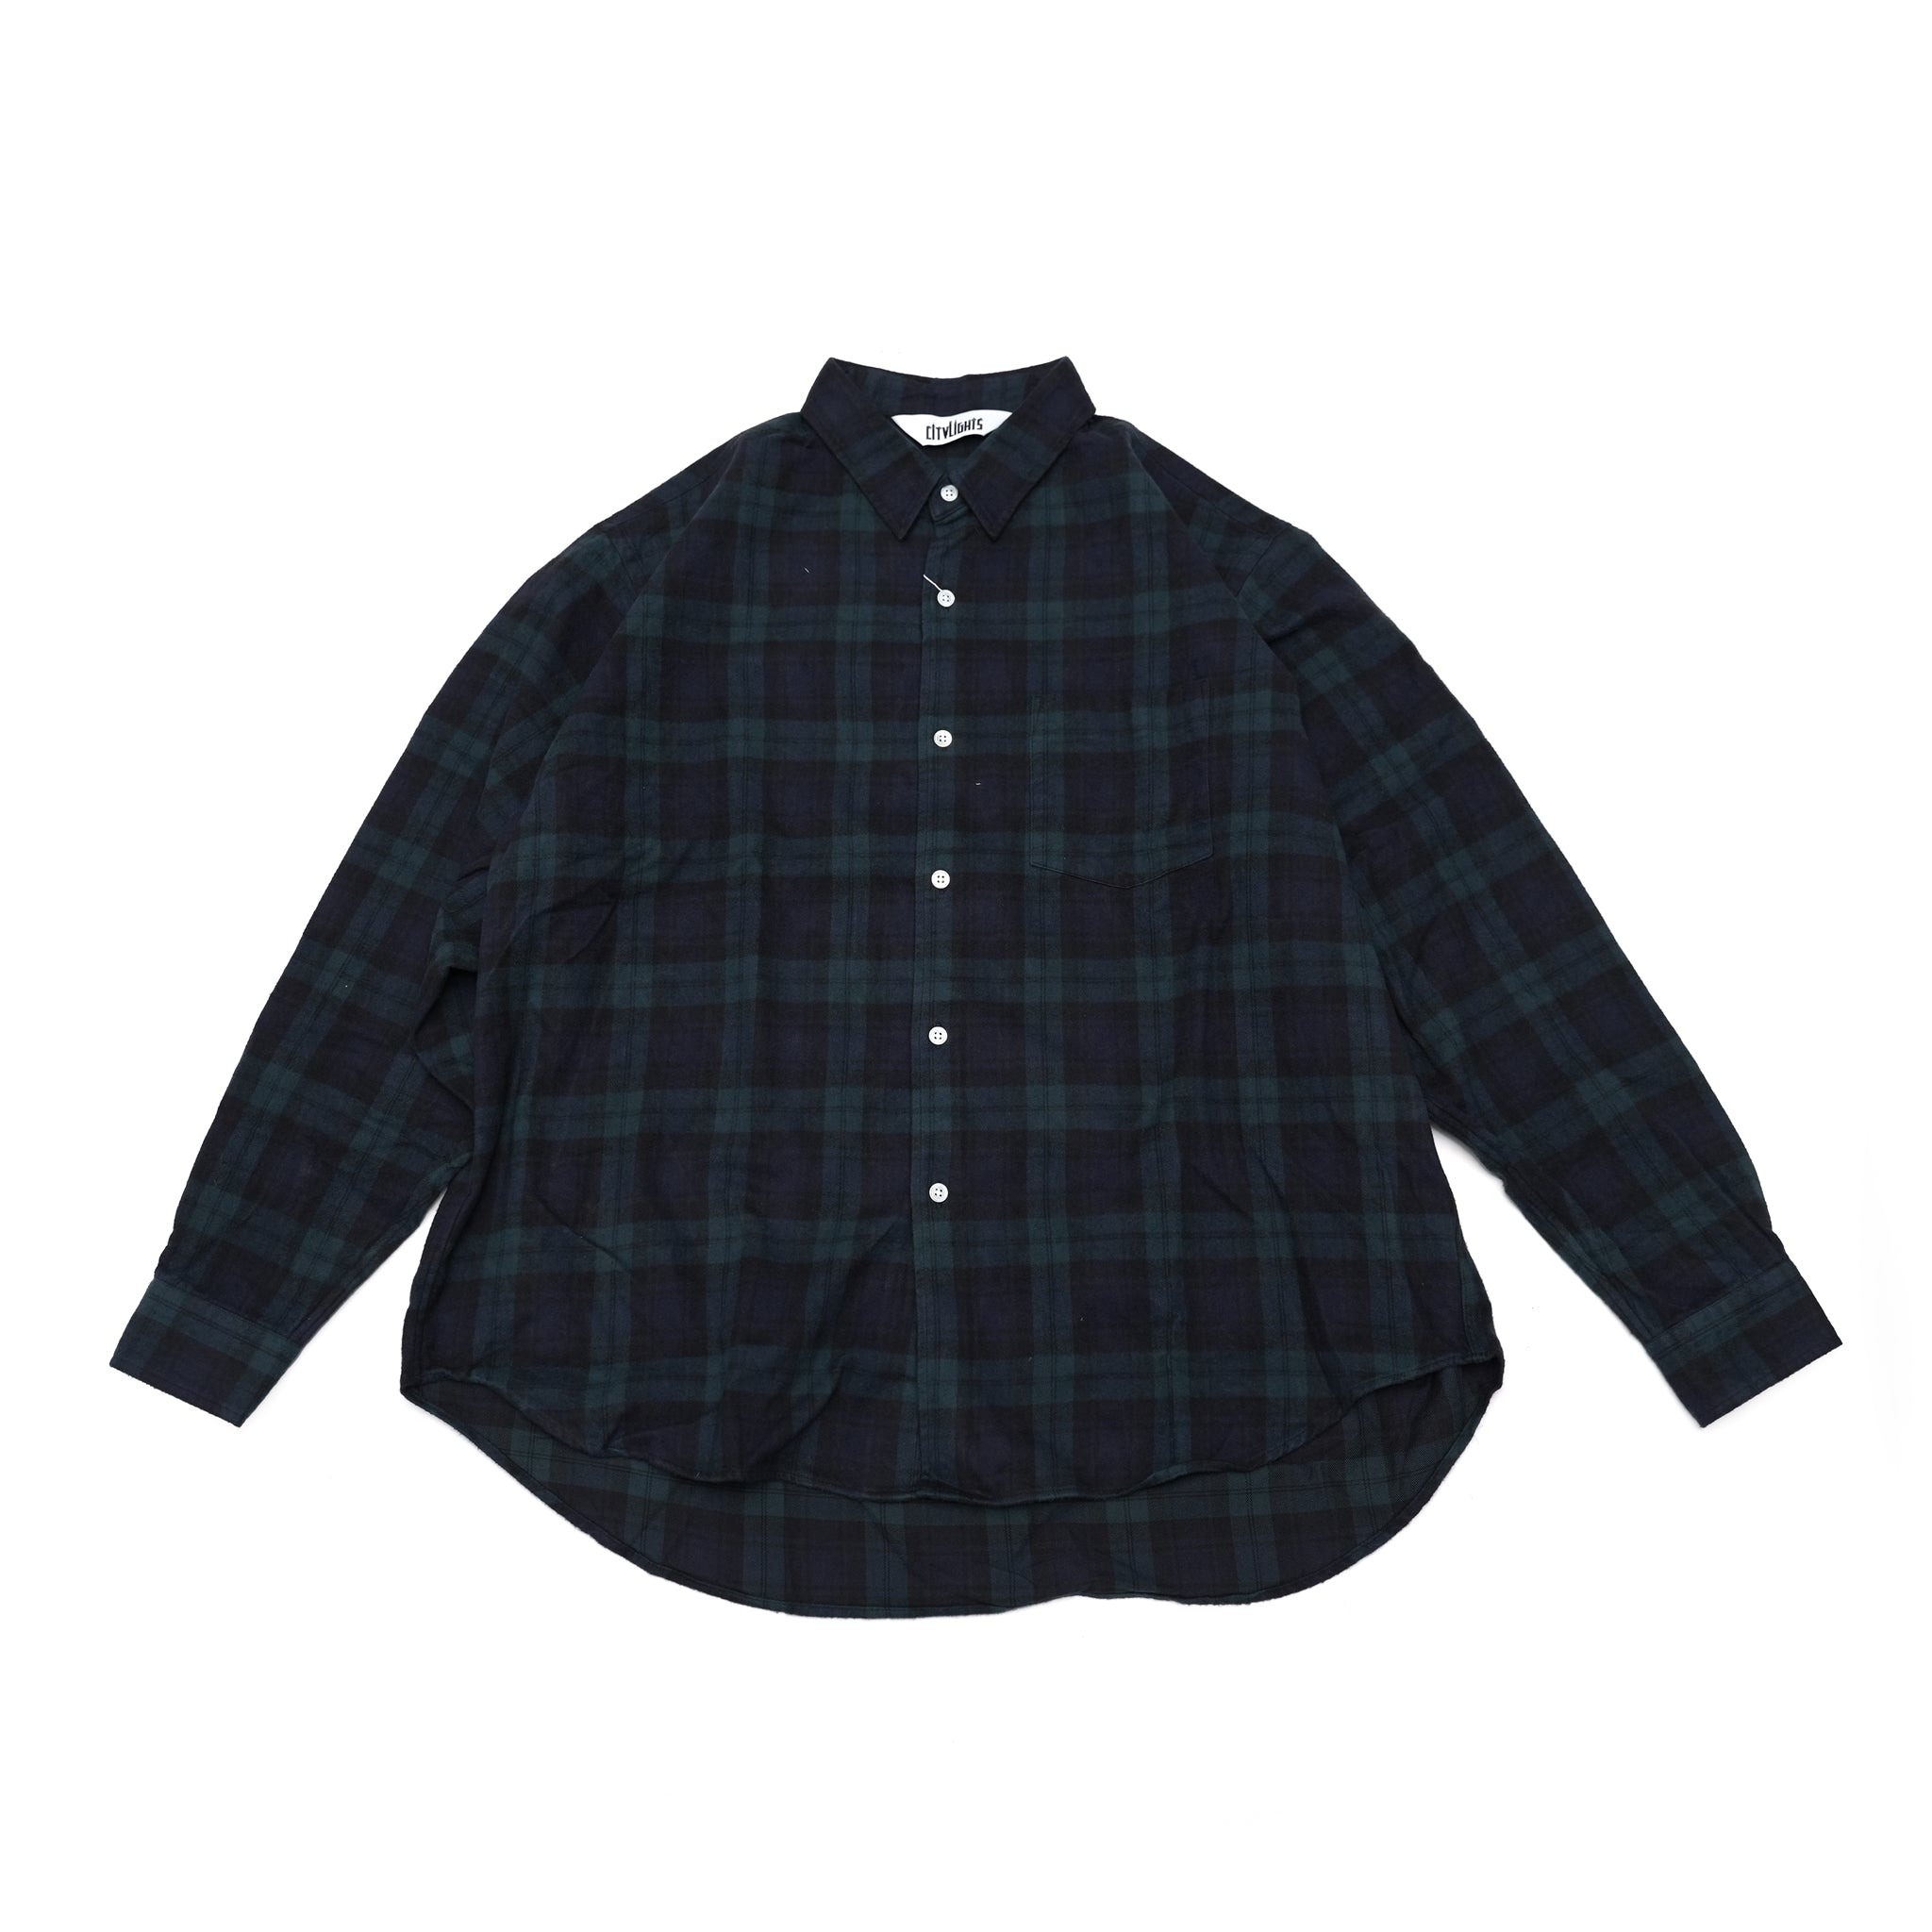 Name:OG REG SHIRTS | Color:BLACKWATCH | Size:Regular/Tall 【CITYLIGHTS PRODUCTS_シティライツプロダクツ】